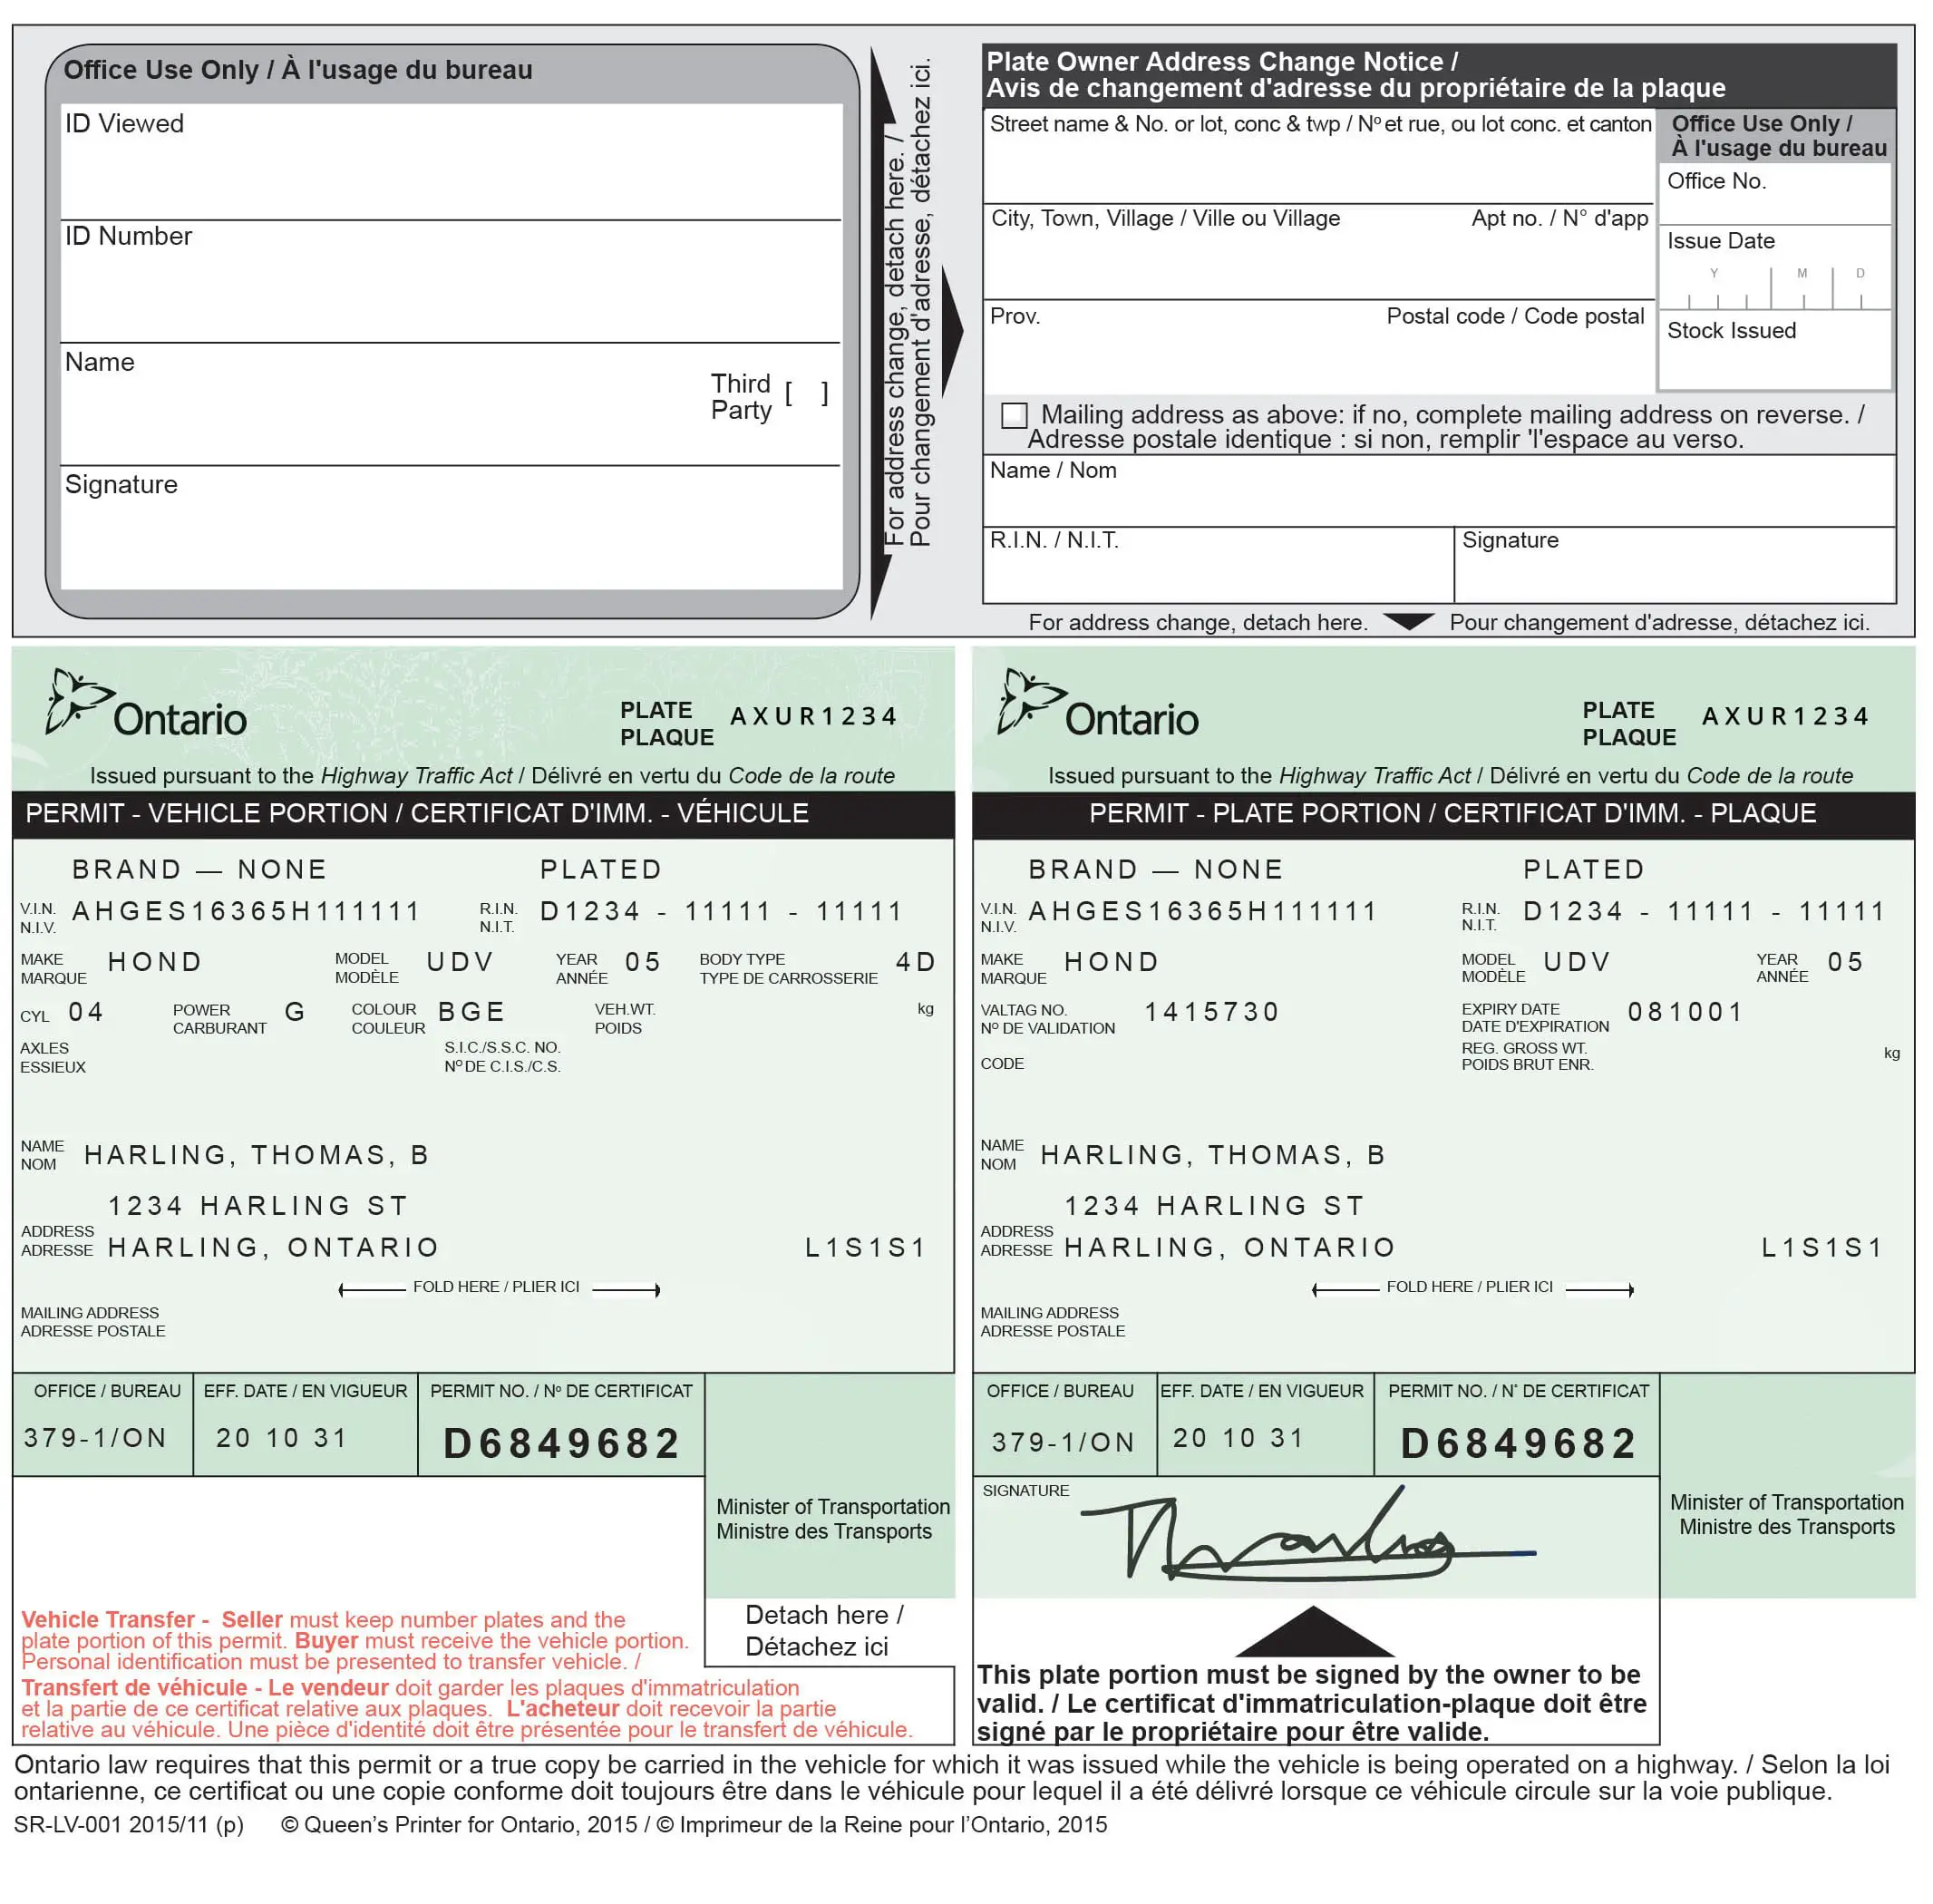 Change information on a vehicle permit